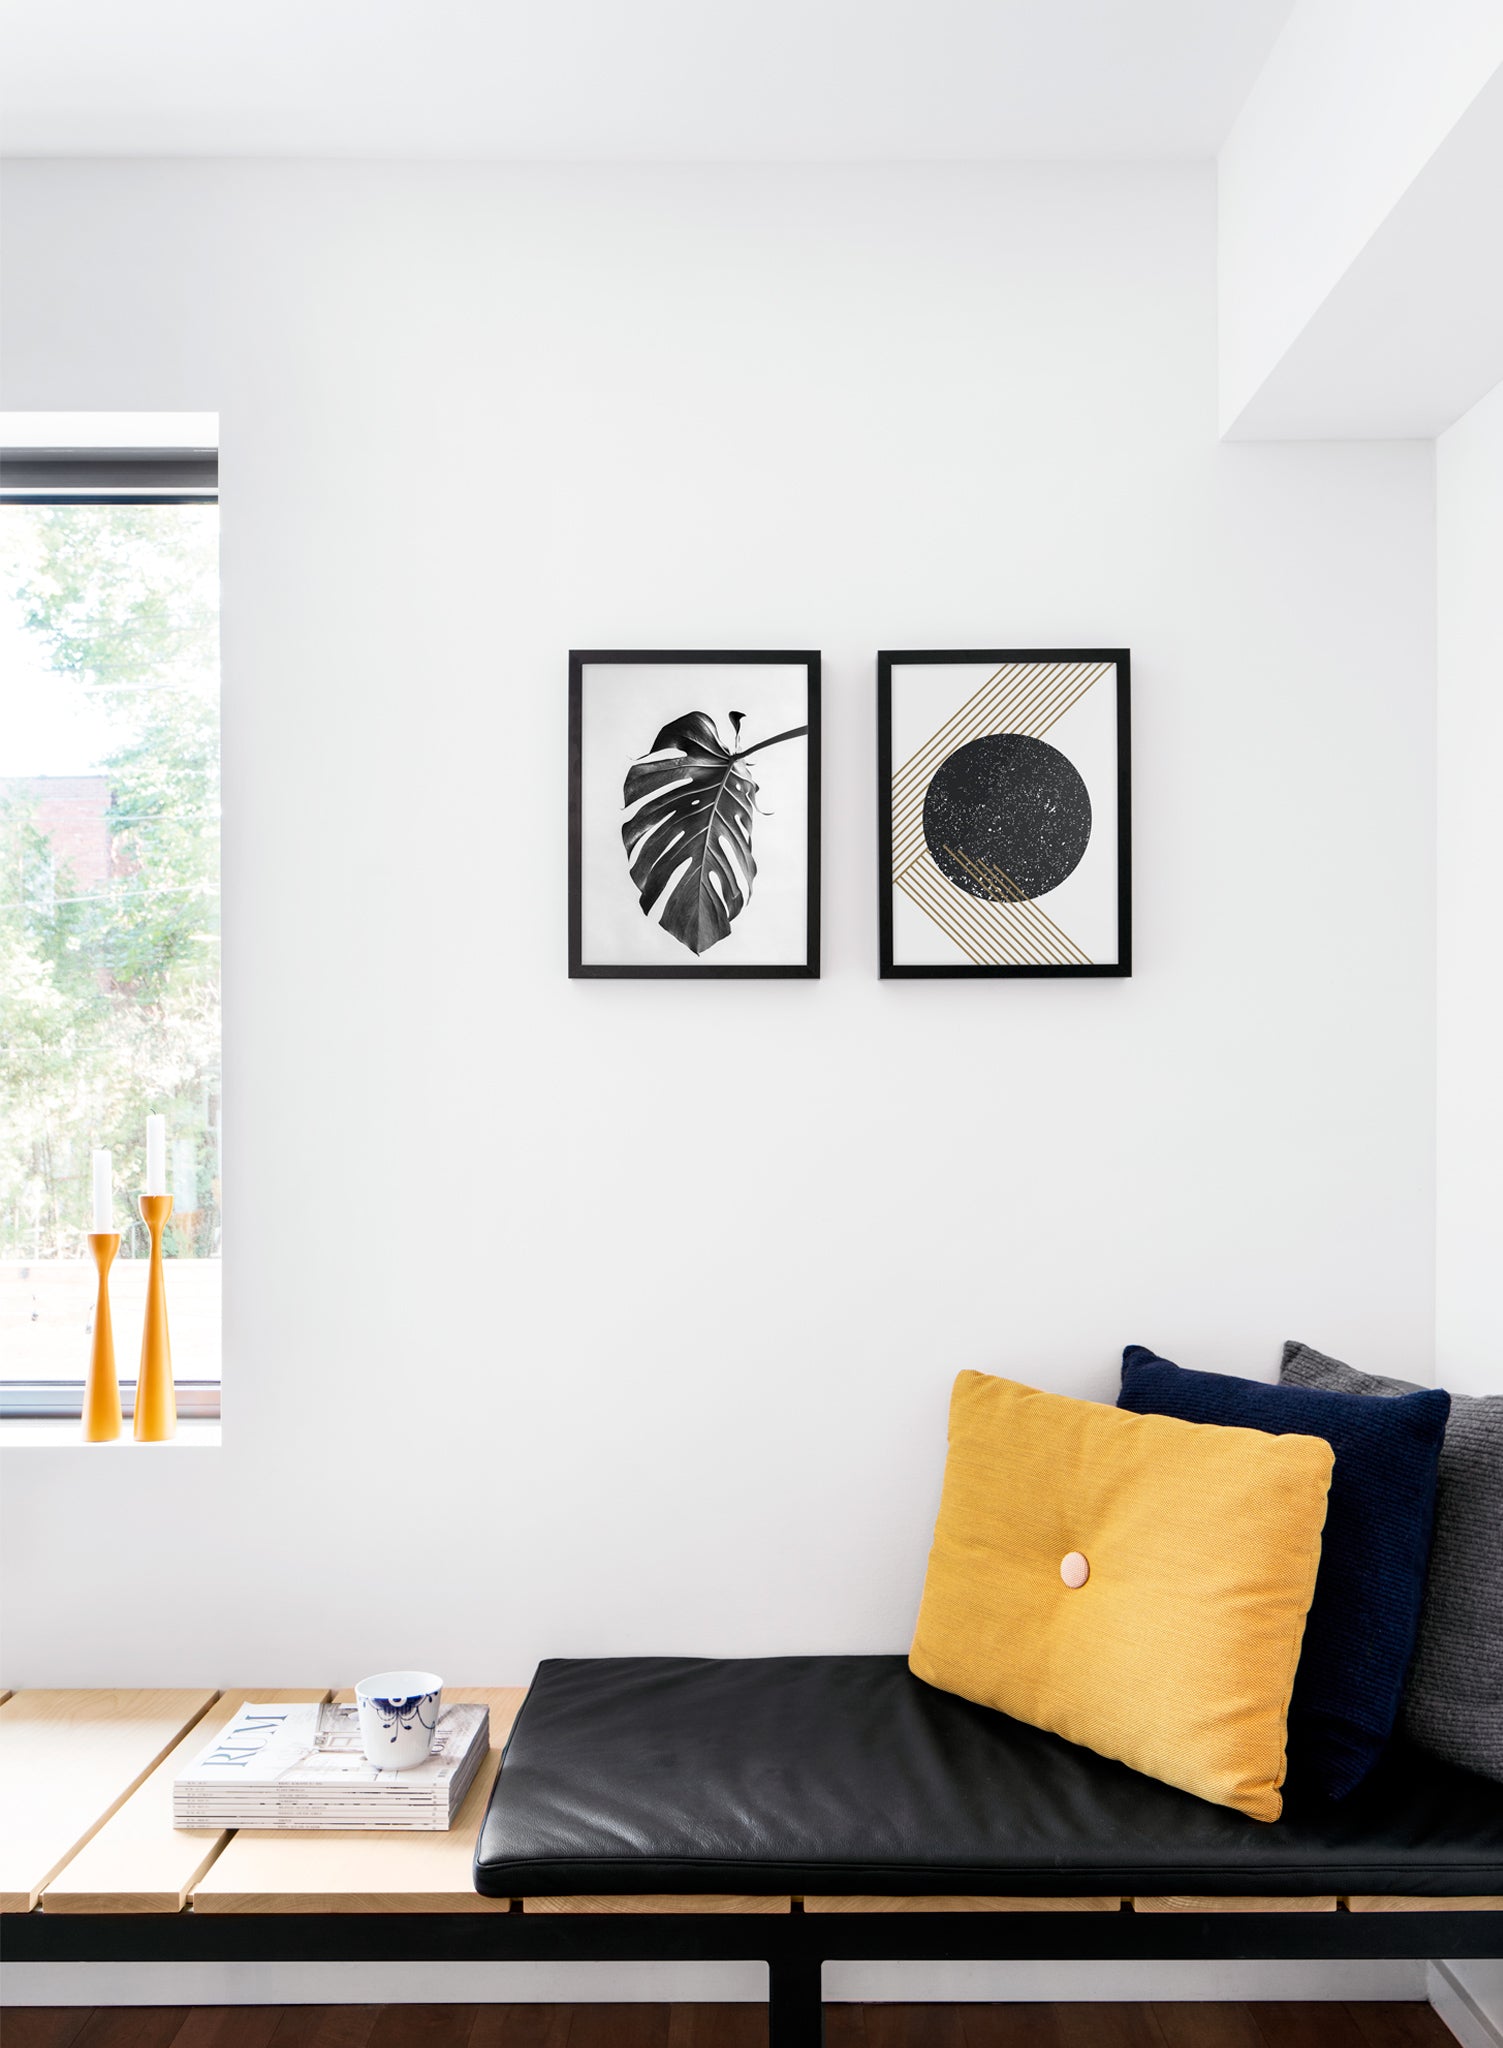 Modern minimalist poster by Opposite Wall with abstract graphic Gold Dust design - Cozy living room nook